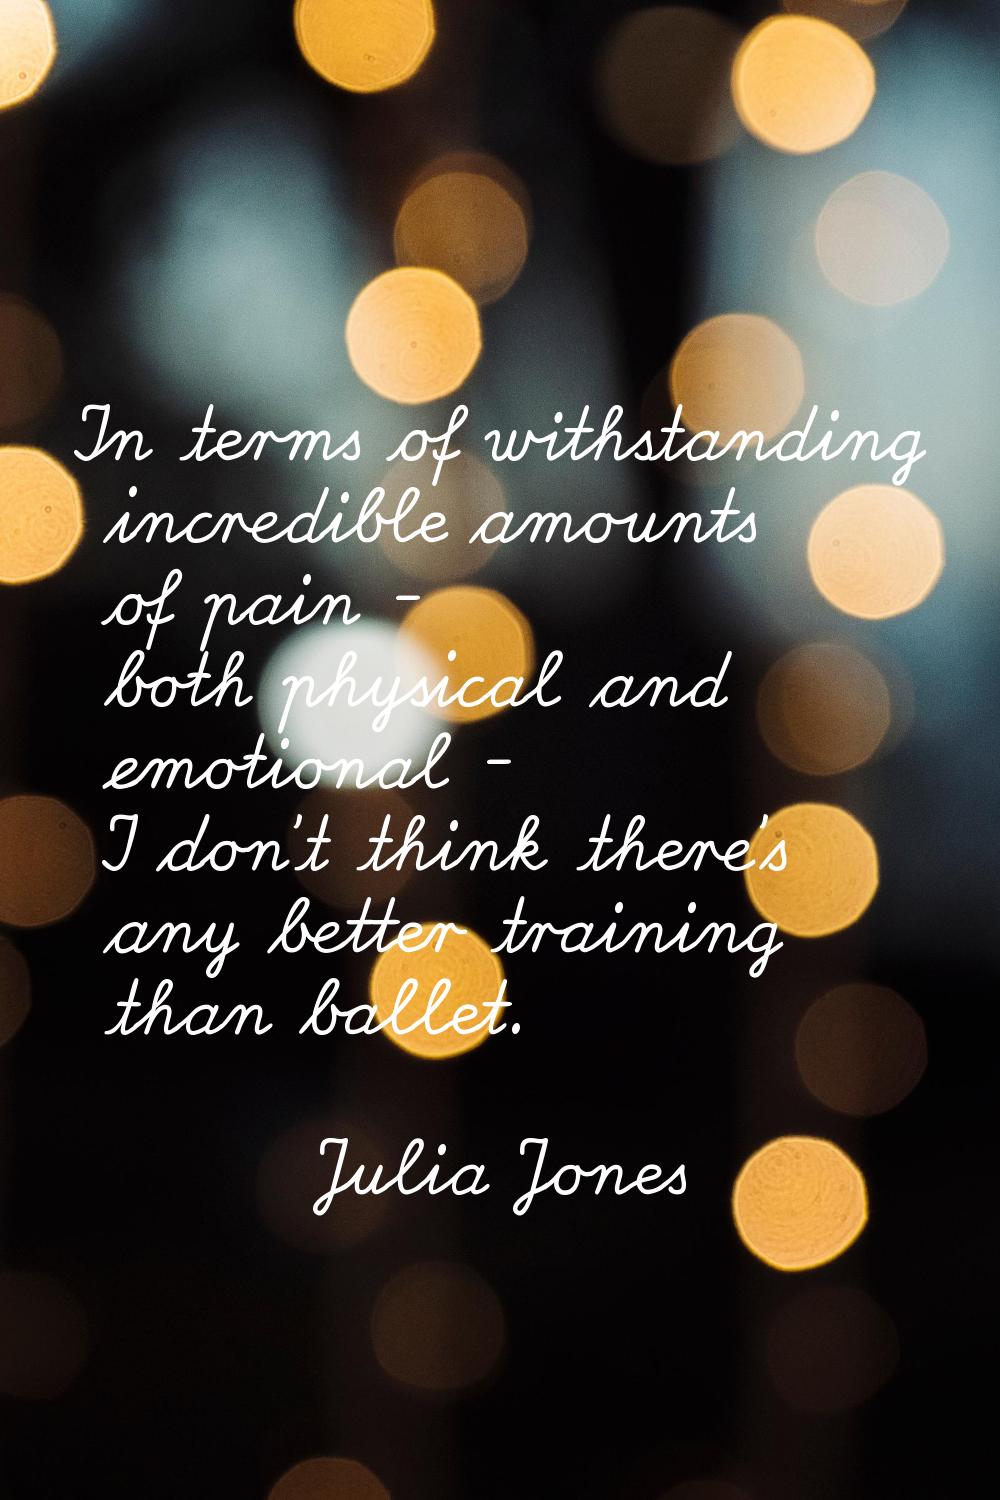 In terms of withstanding incredible amounts of pain - both physical and emotional - I don't think t